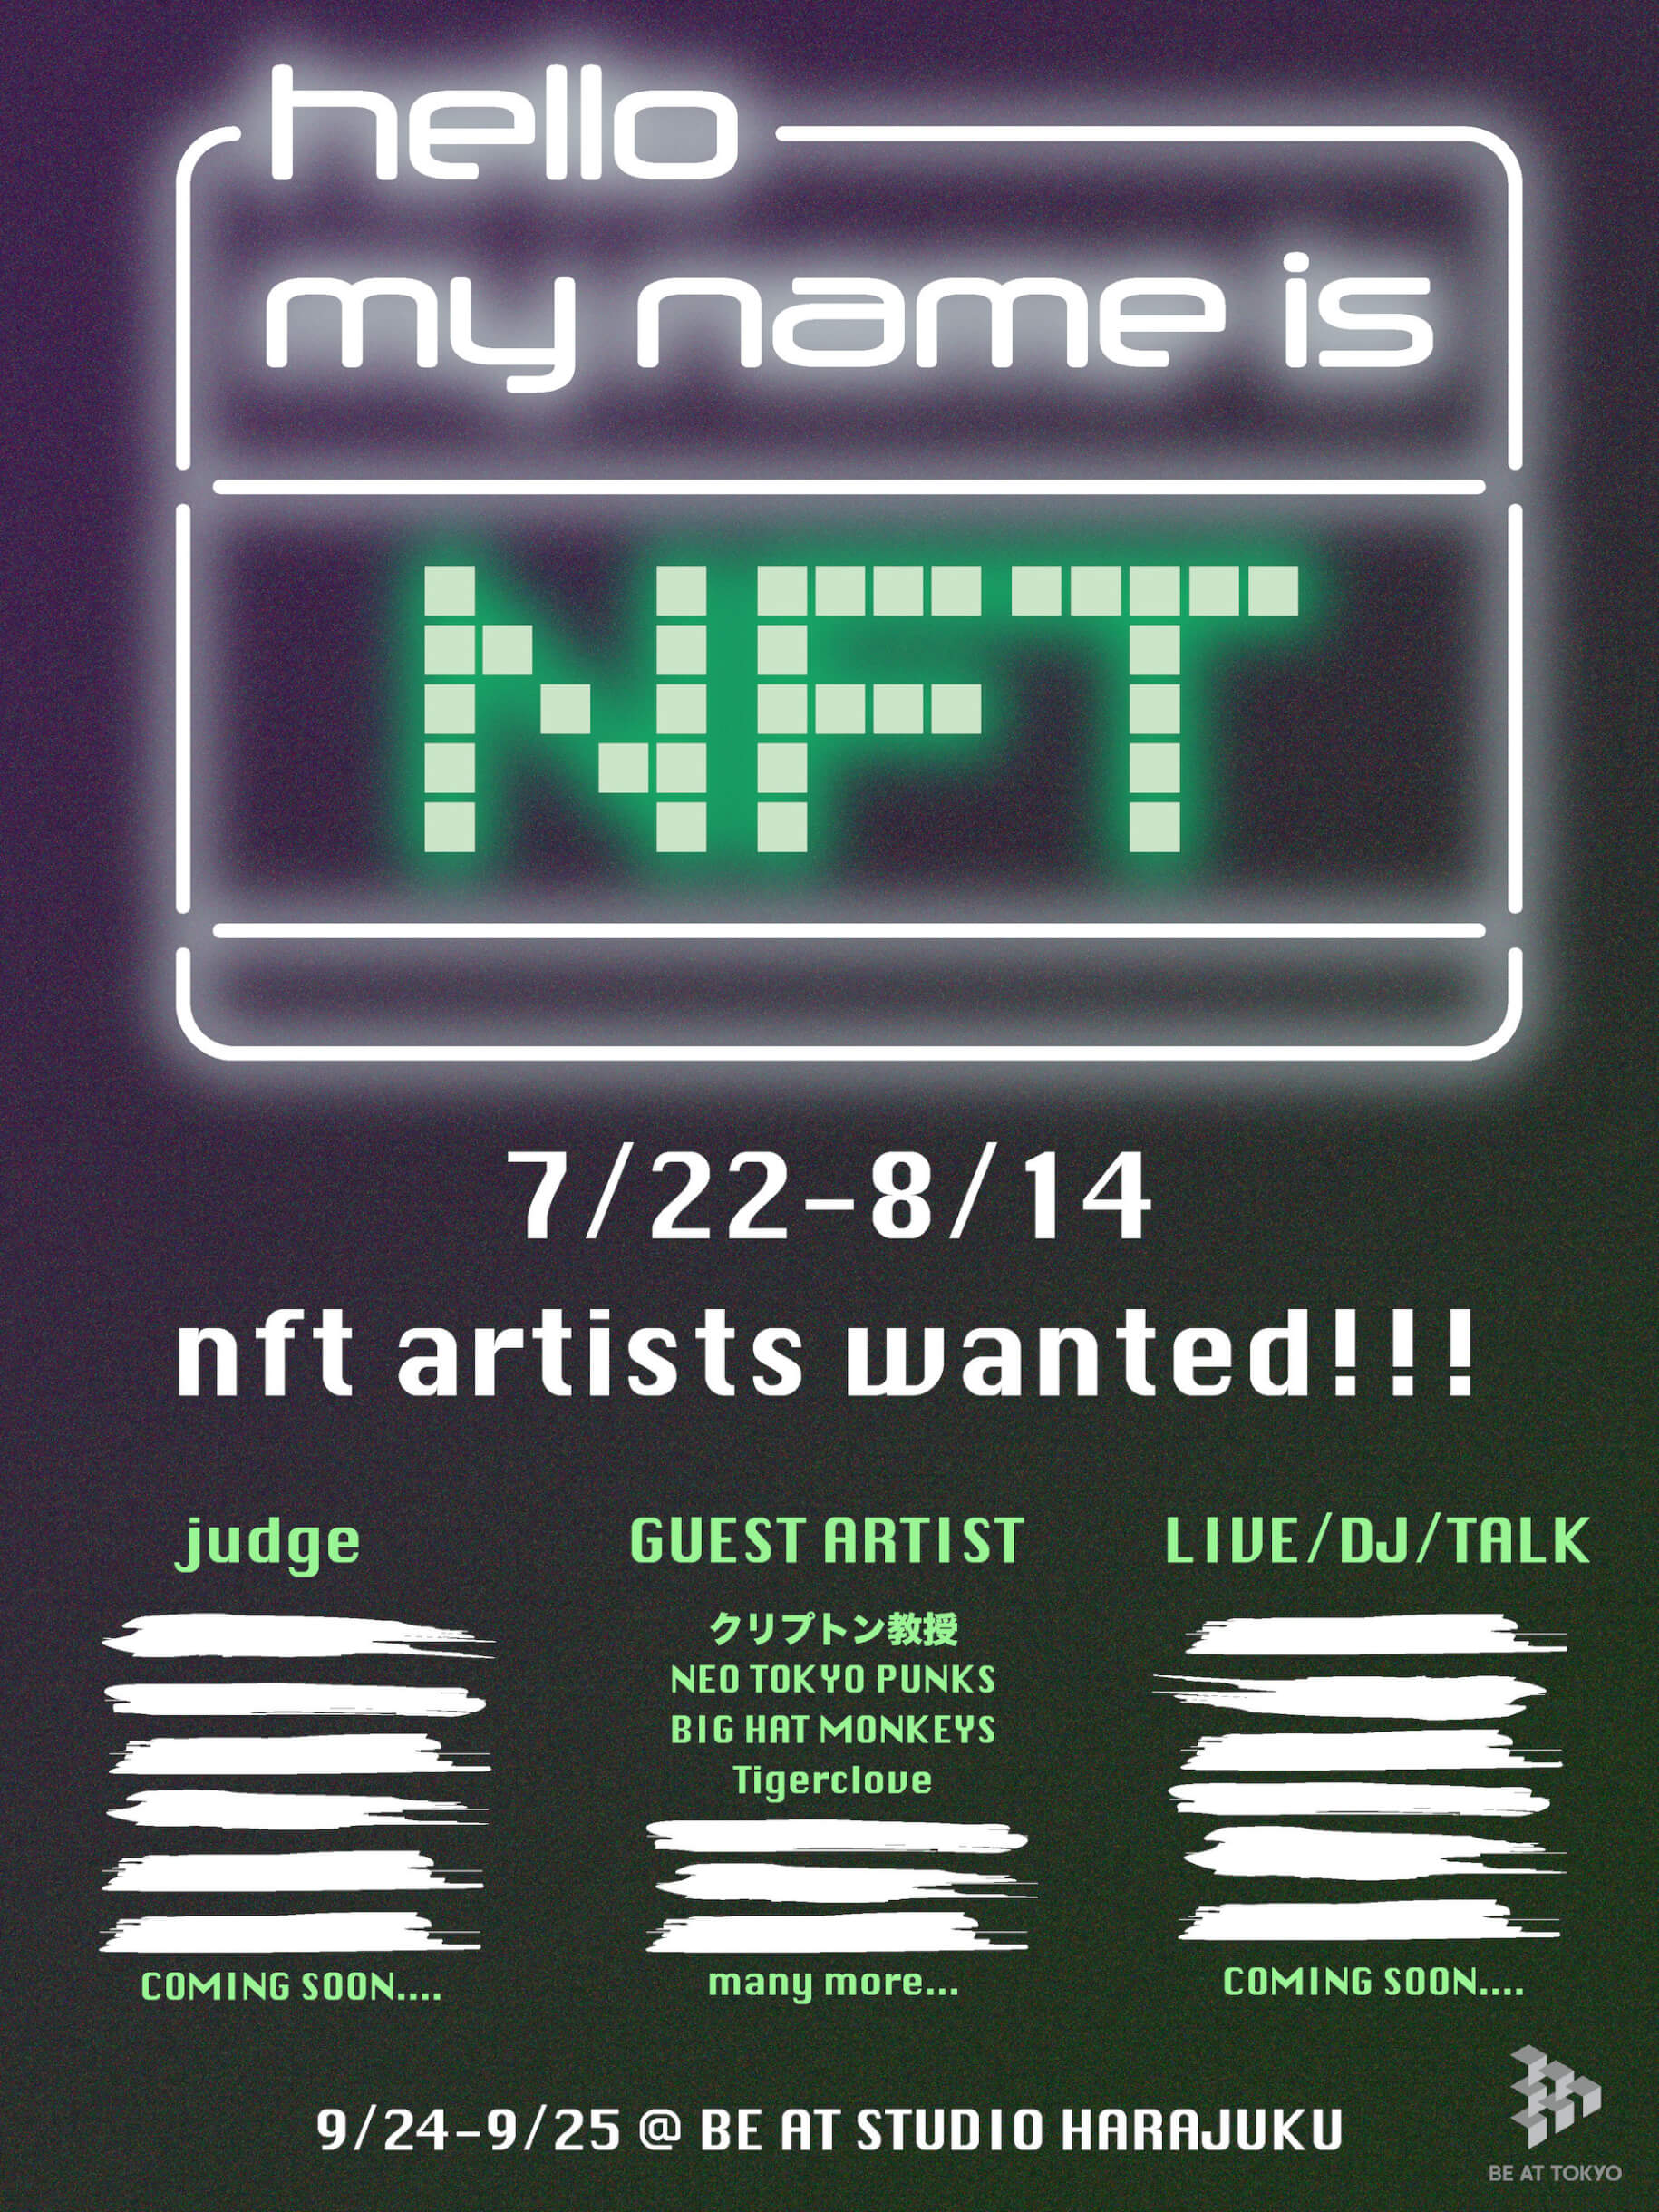 「BE AT TOKYO」でNFTアートのイベント＜Hello my name is NFT＞開催｜アーティストの一般公募も実施 art220726_be-at-tokyo-nft-01